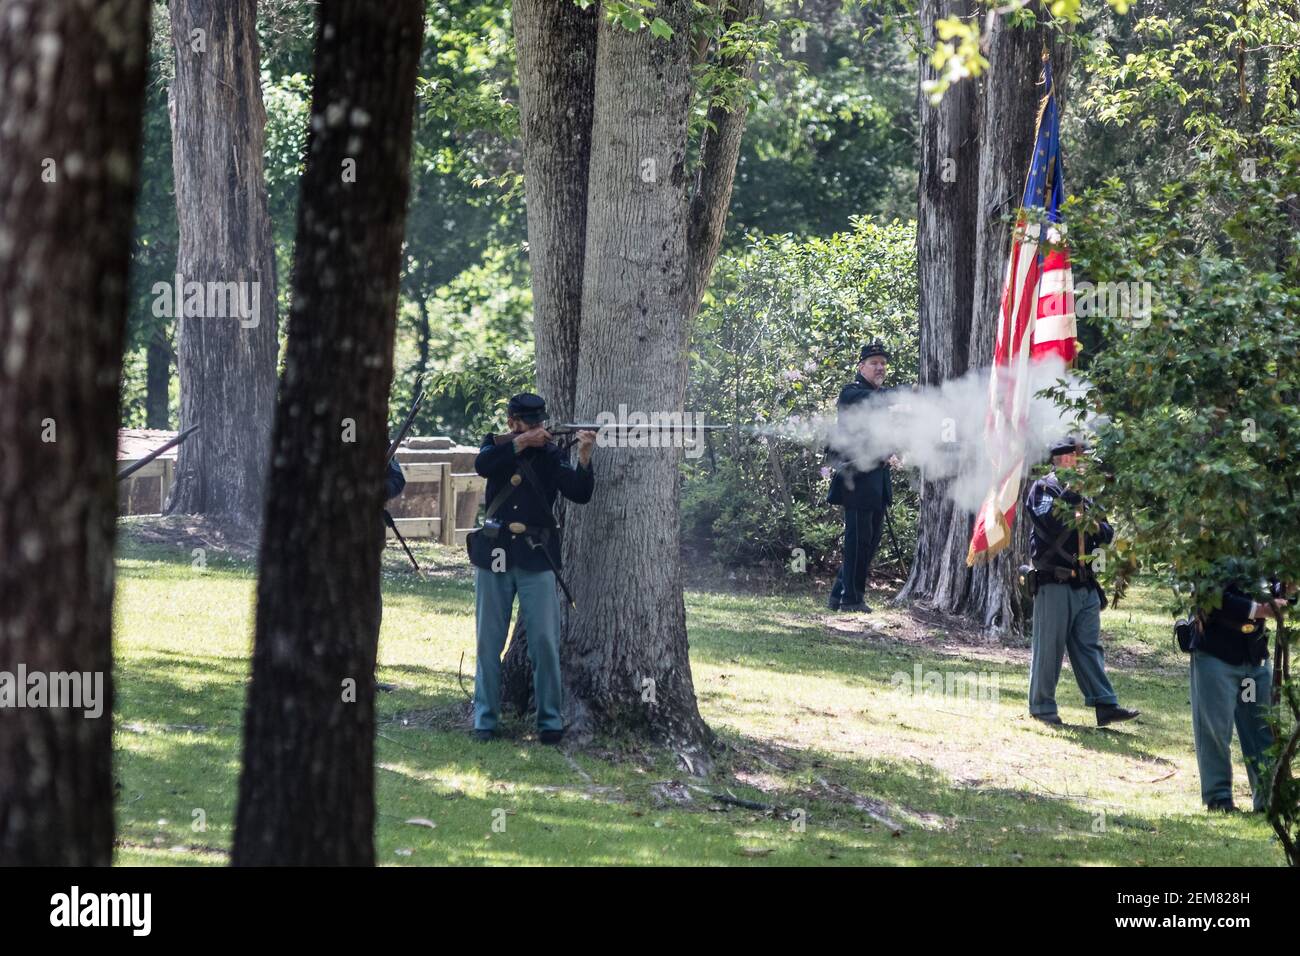 Marbury, Alabama/USA-April 28, 2018: Union soldiers take cover behind trees in the battle reenactment at the Confederate Memorial Park. Stock Photo